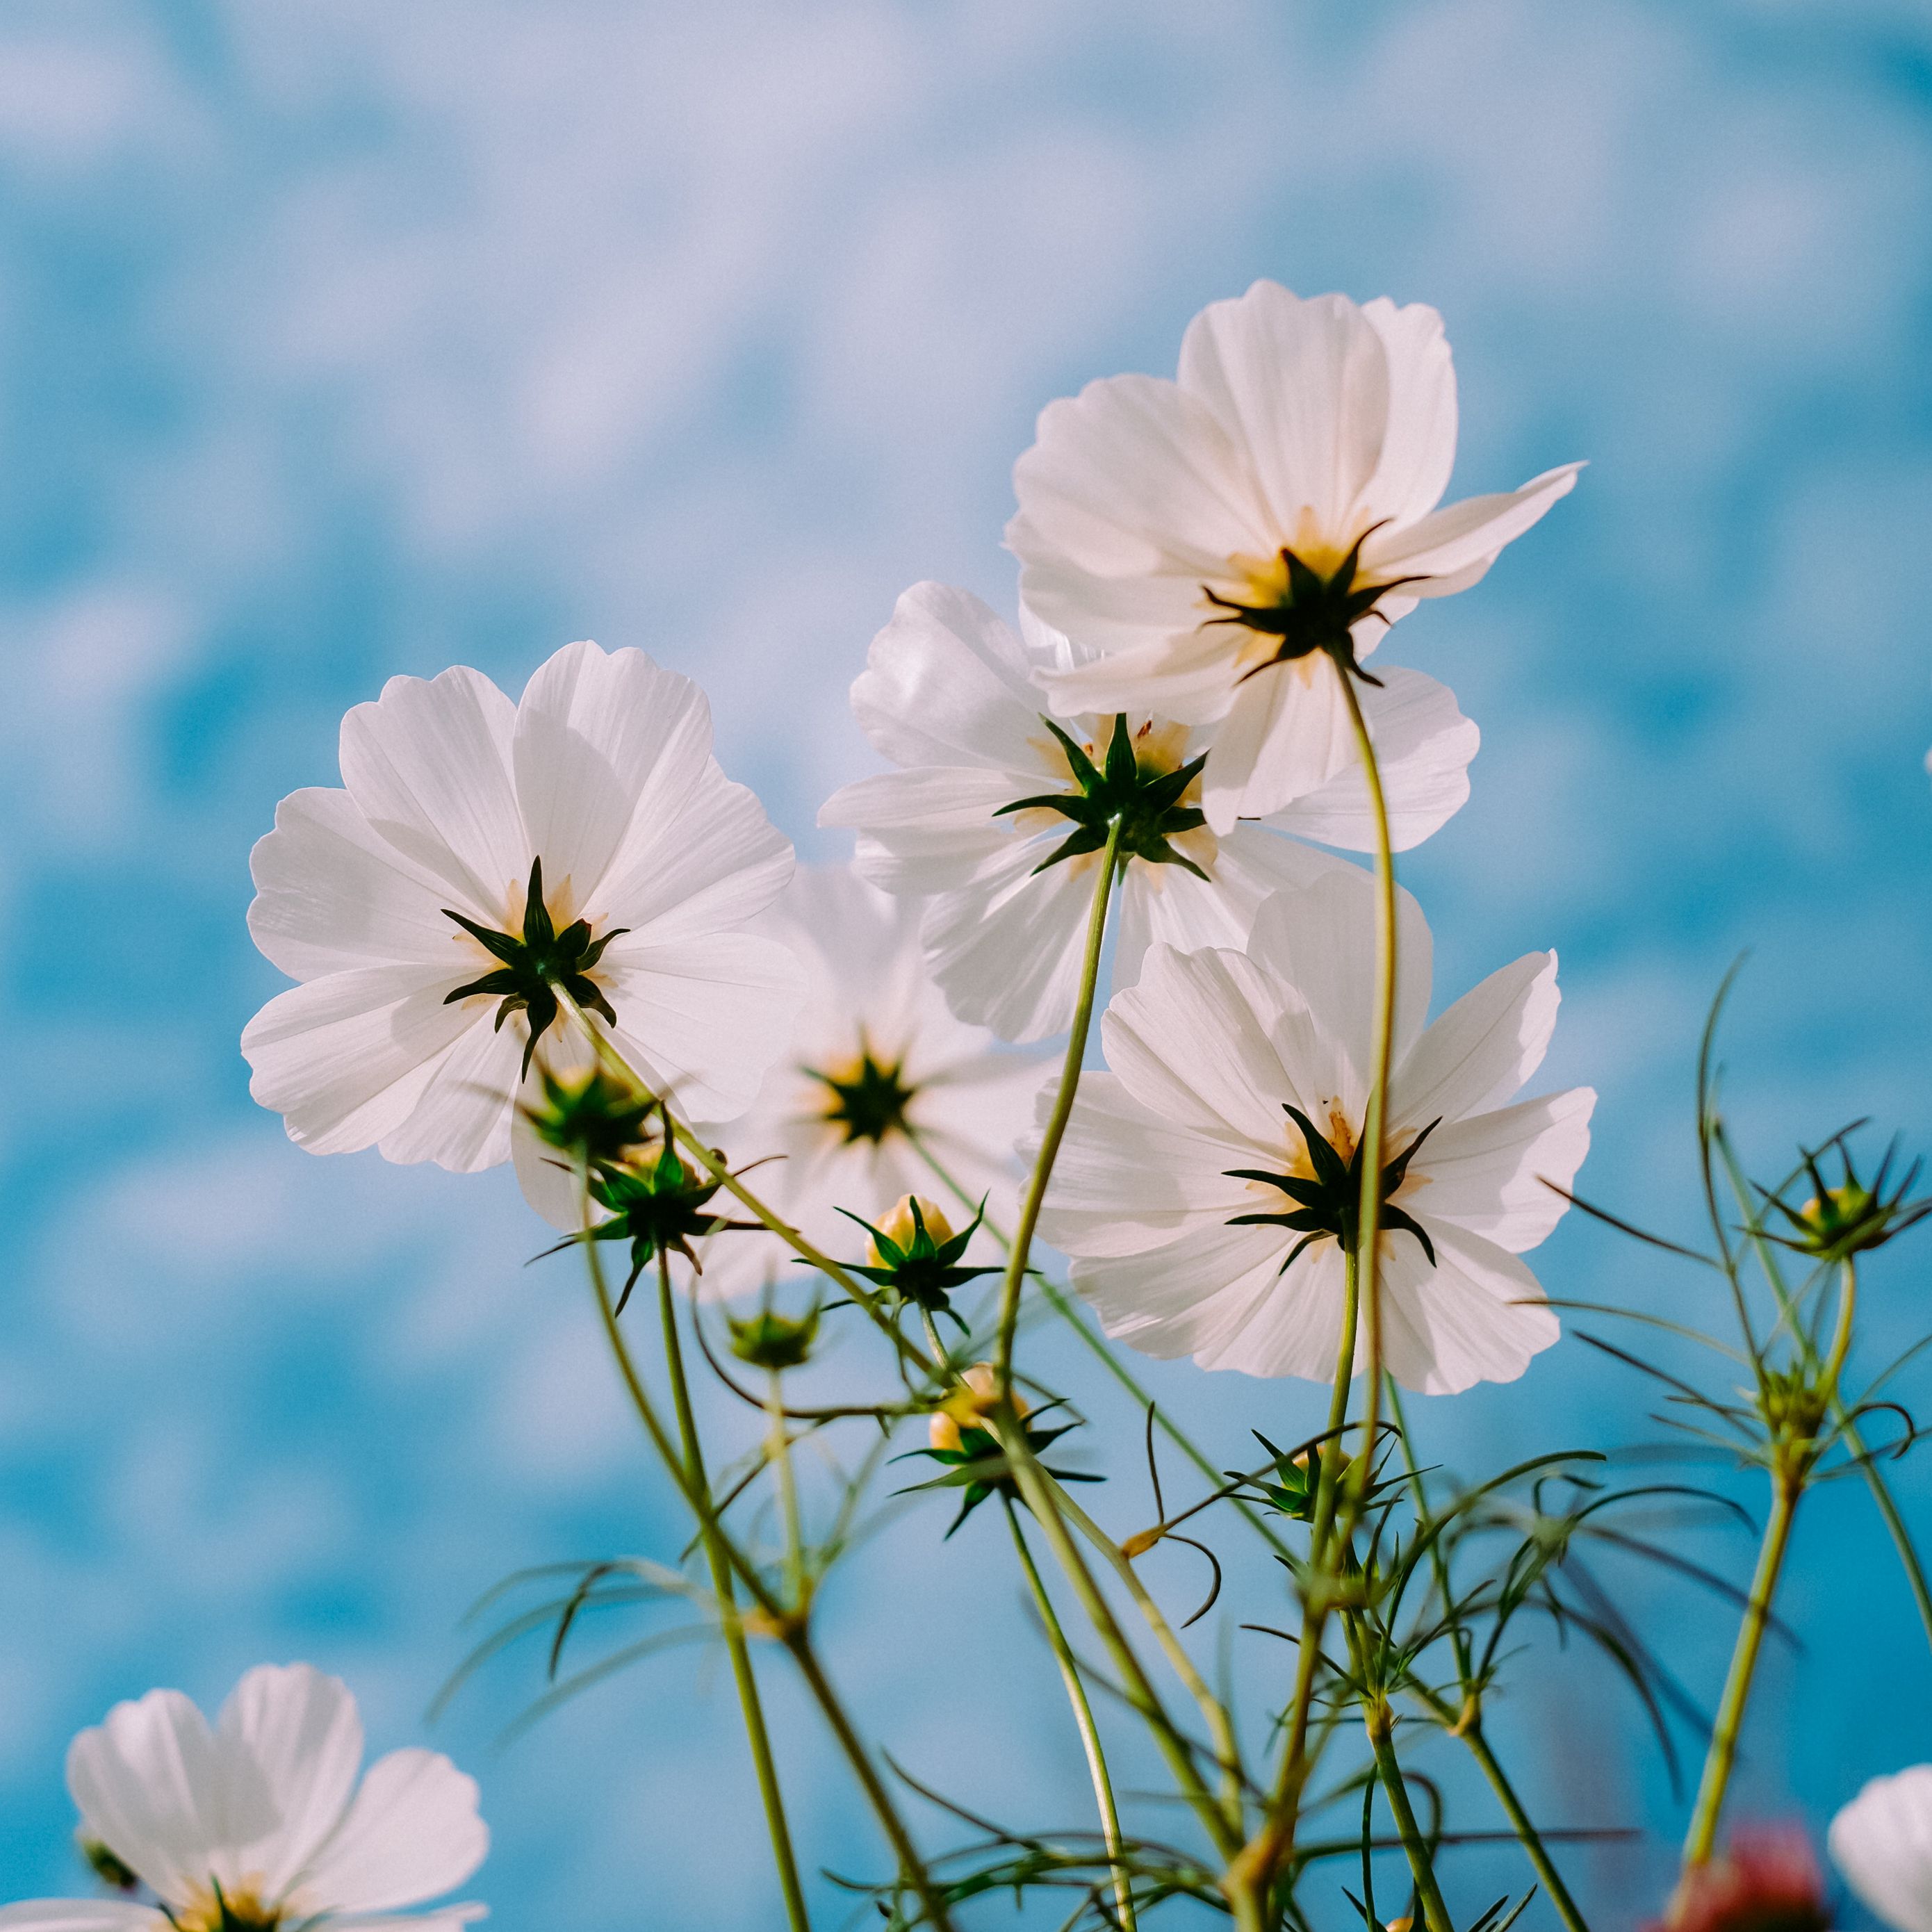 Download wallpaper 2780x2780 cosmos, flowers, white, petals, sky, summer ipad air, ipad air ipad ipad ipad mini ipad mini ipad mini ipad pro 9.7 for parallax HD background